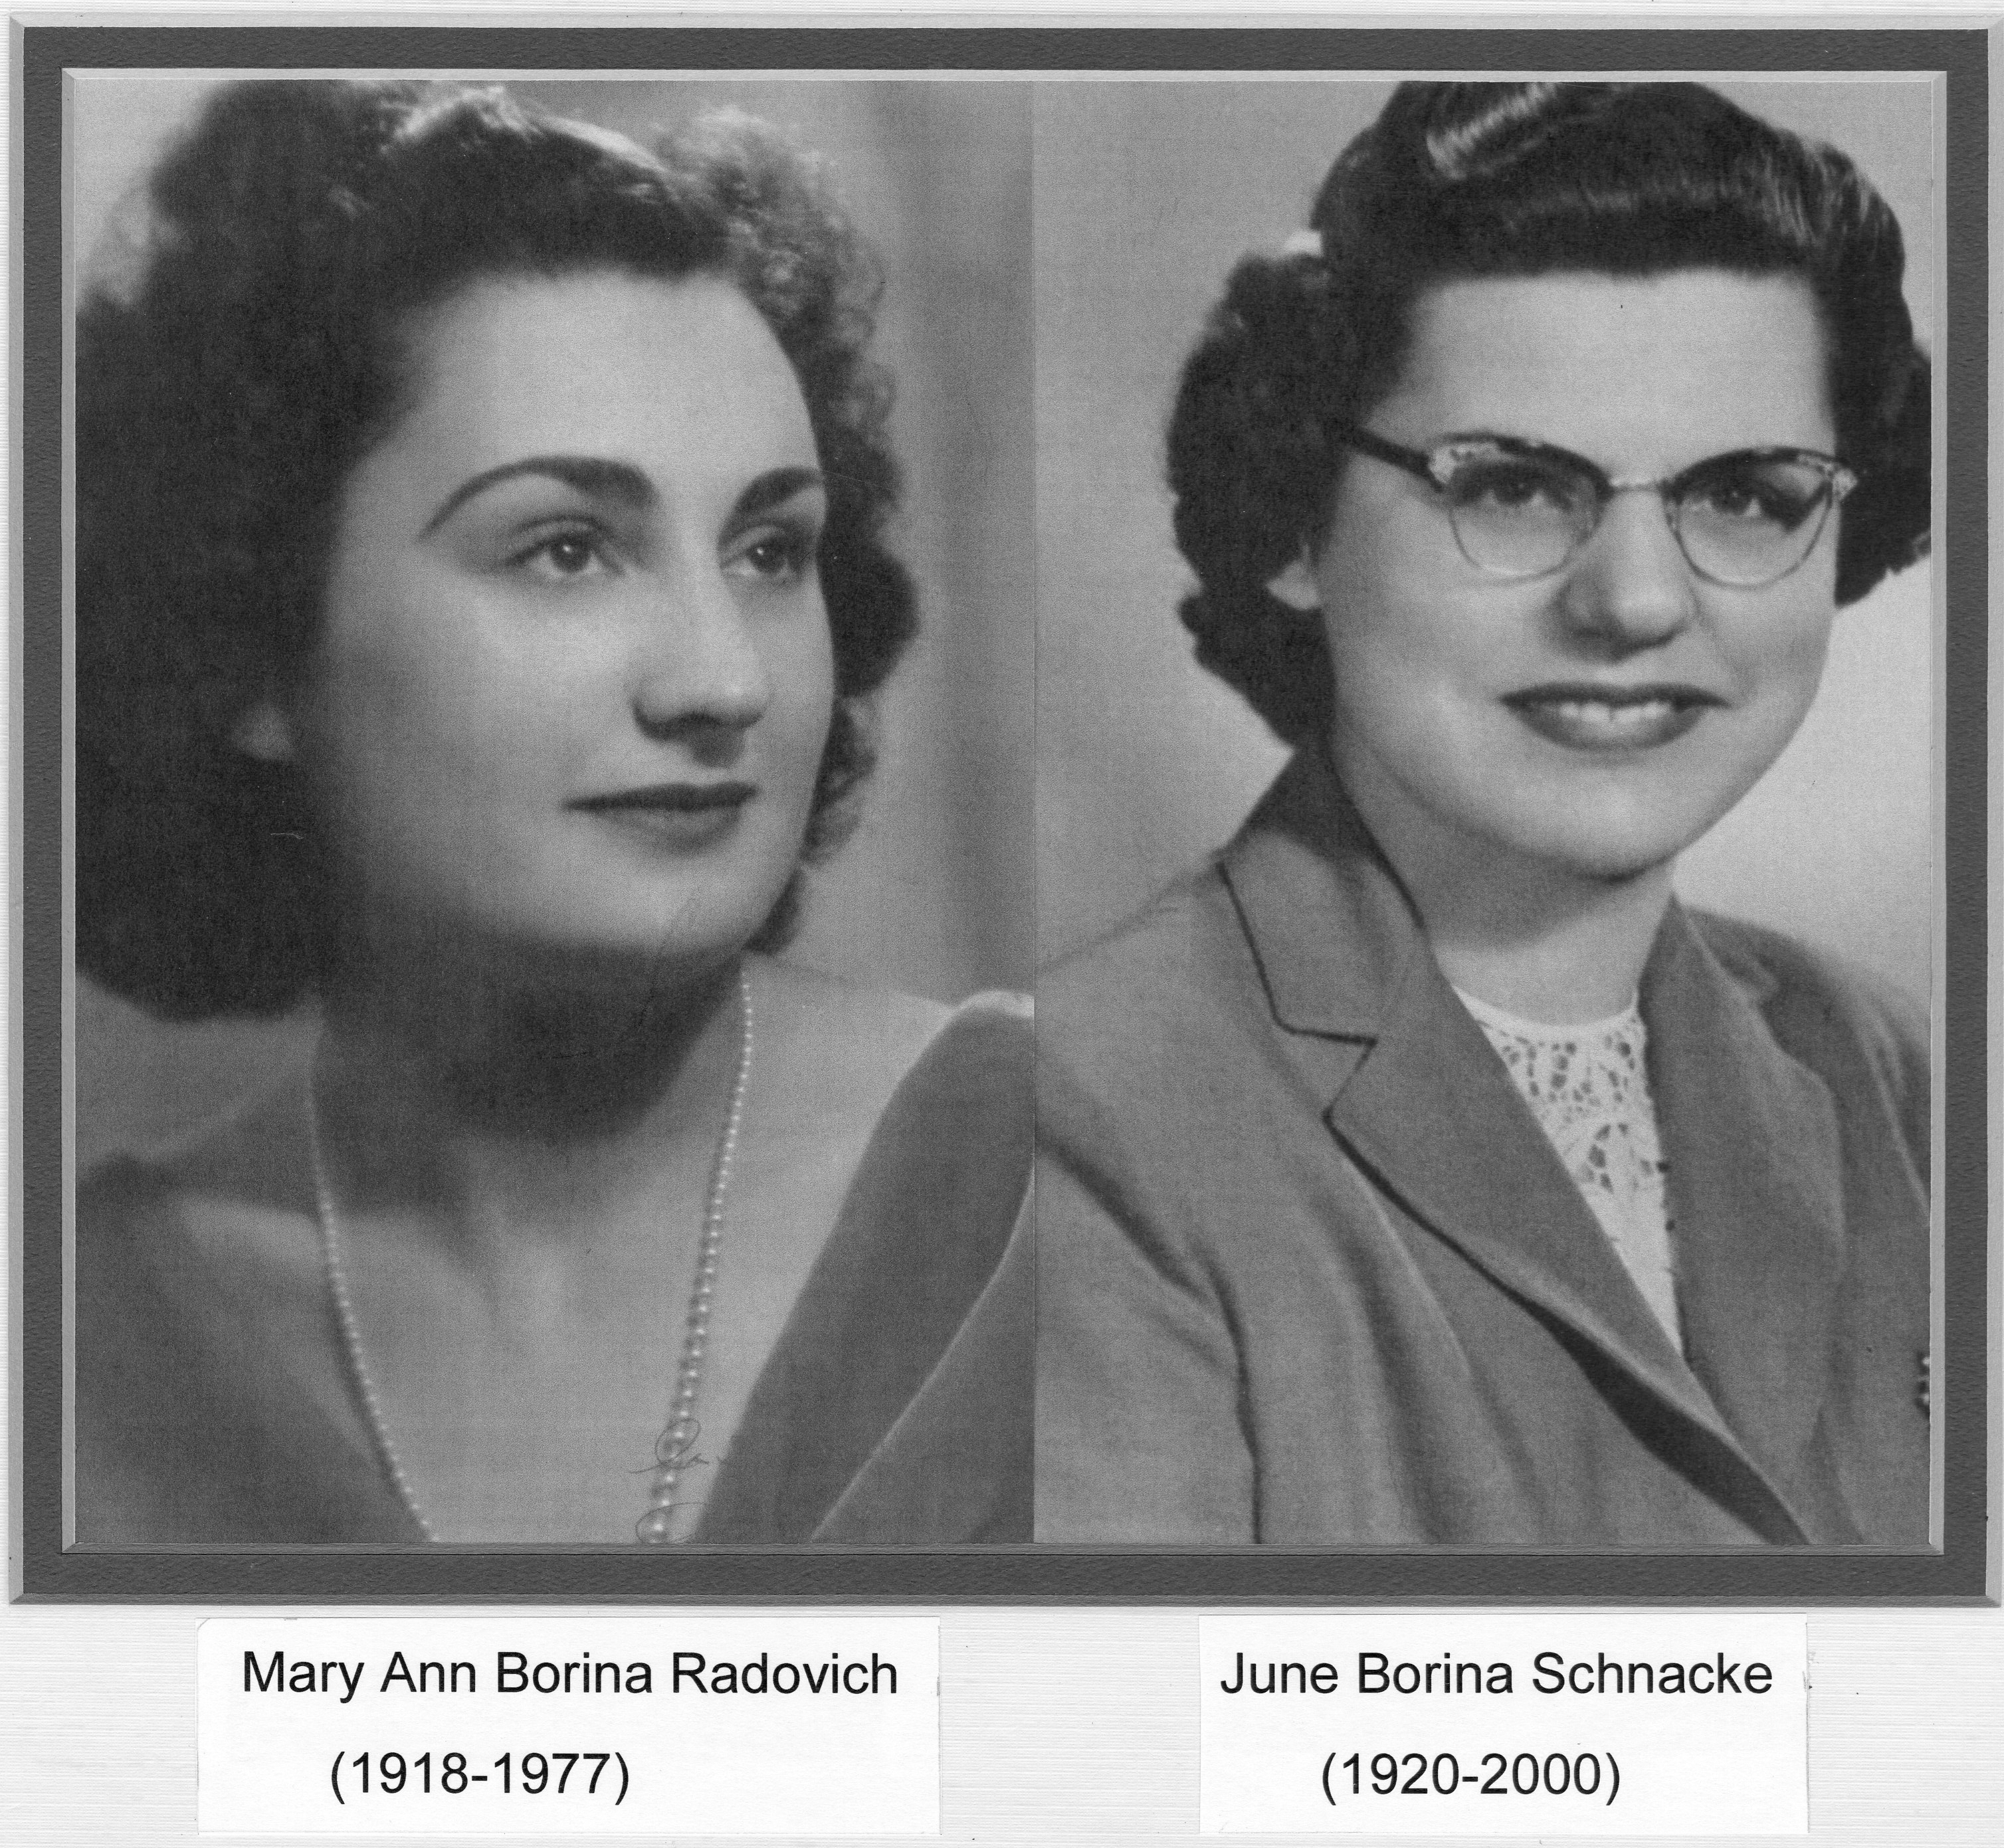 Side by side photos of Mary Ann Borina Radovich and June Borina Schnacke. Mary is dressed in a gown and pearl evenings with curled hair. June is dressed in a professional coat, with glasses, curled hair and period glasses.